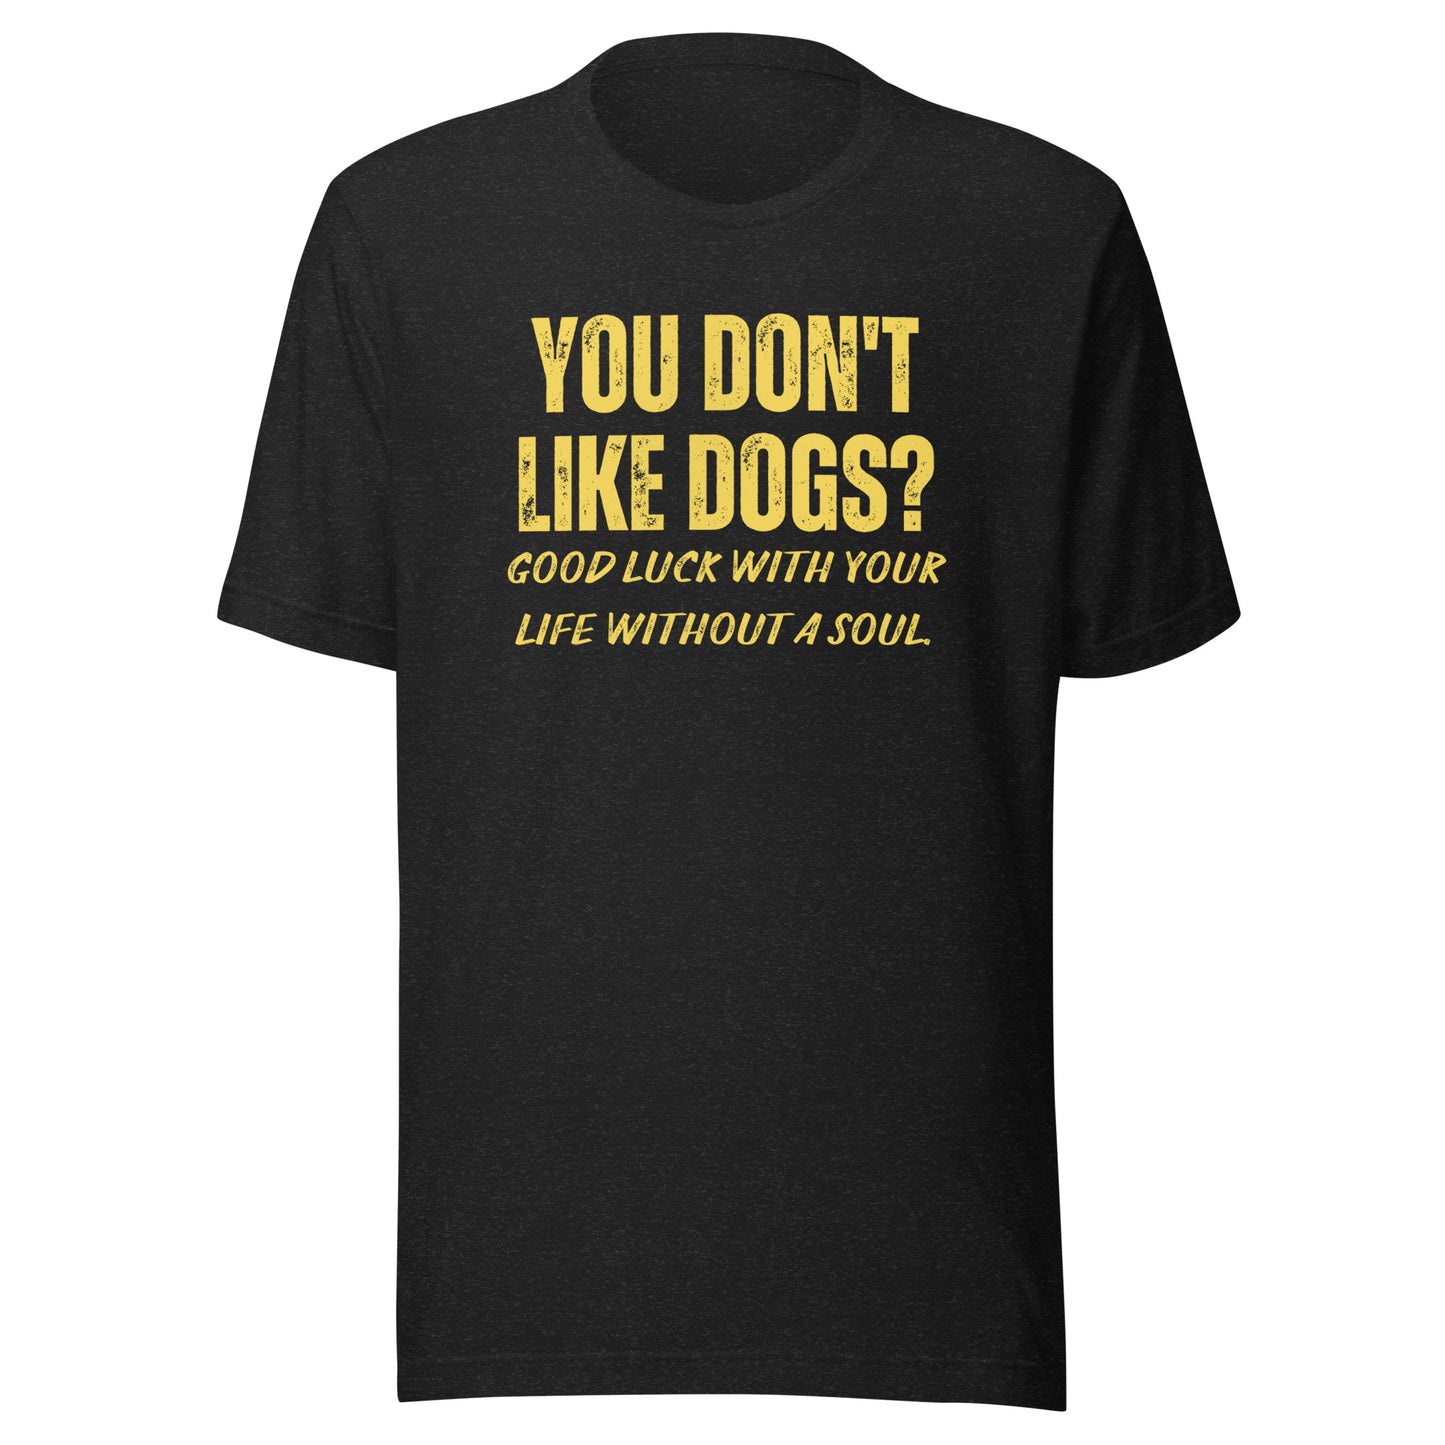 You Don't Like Dogs? Unisex t-shirt